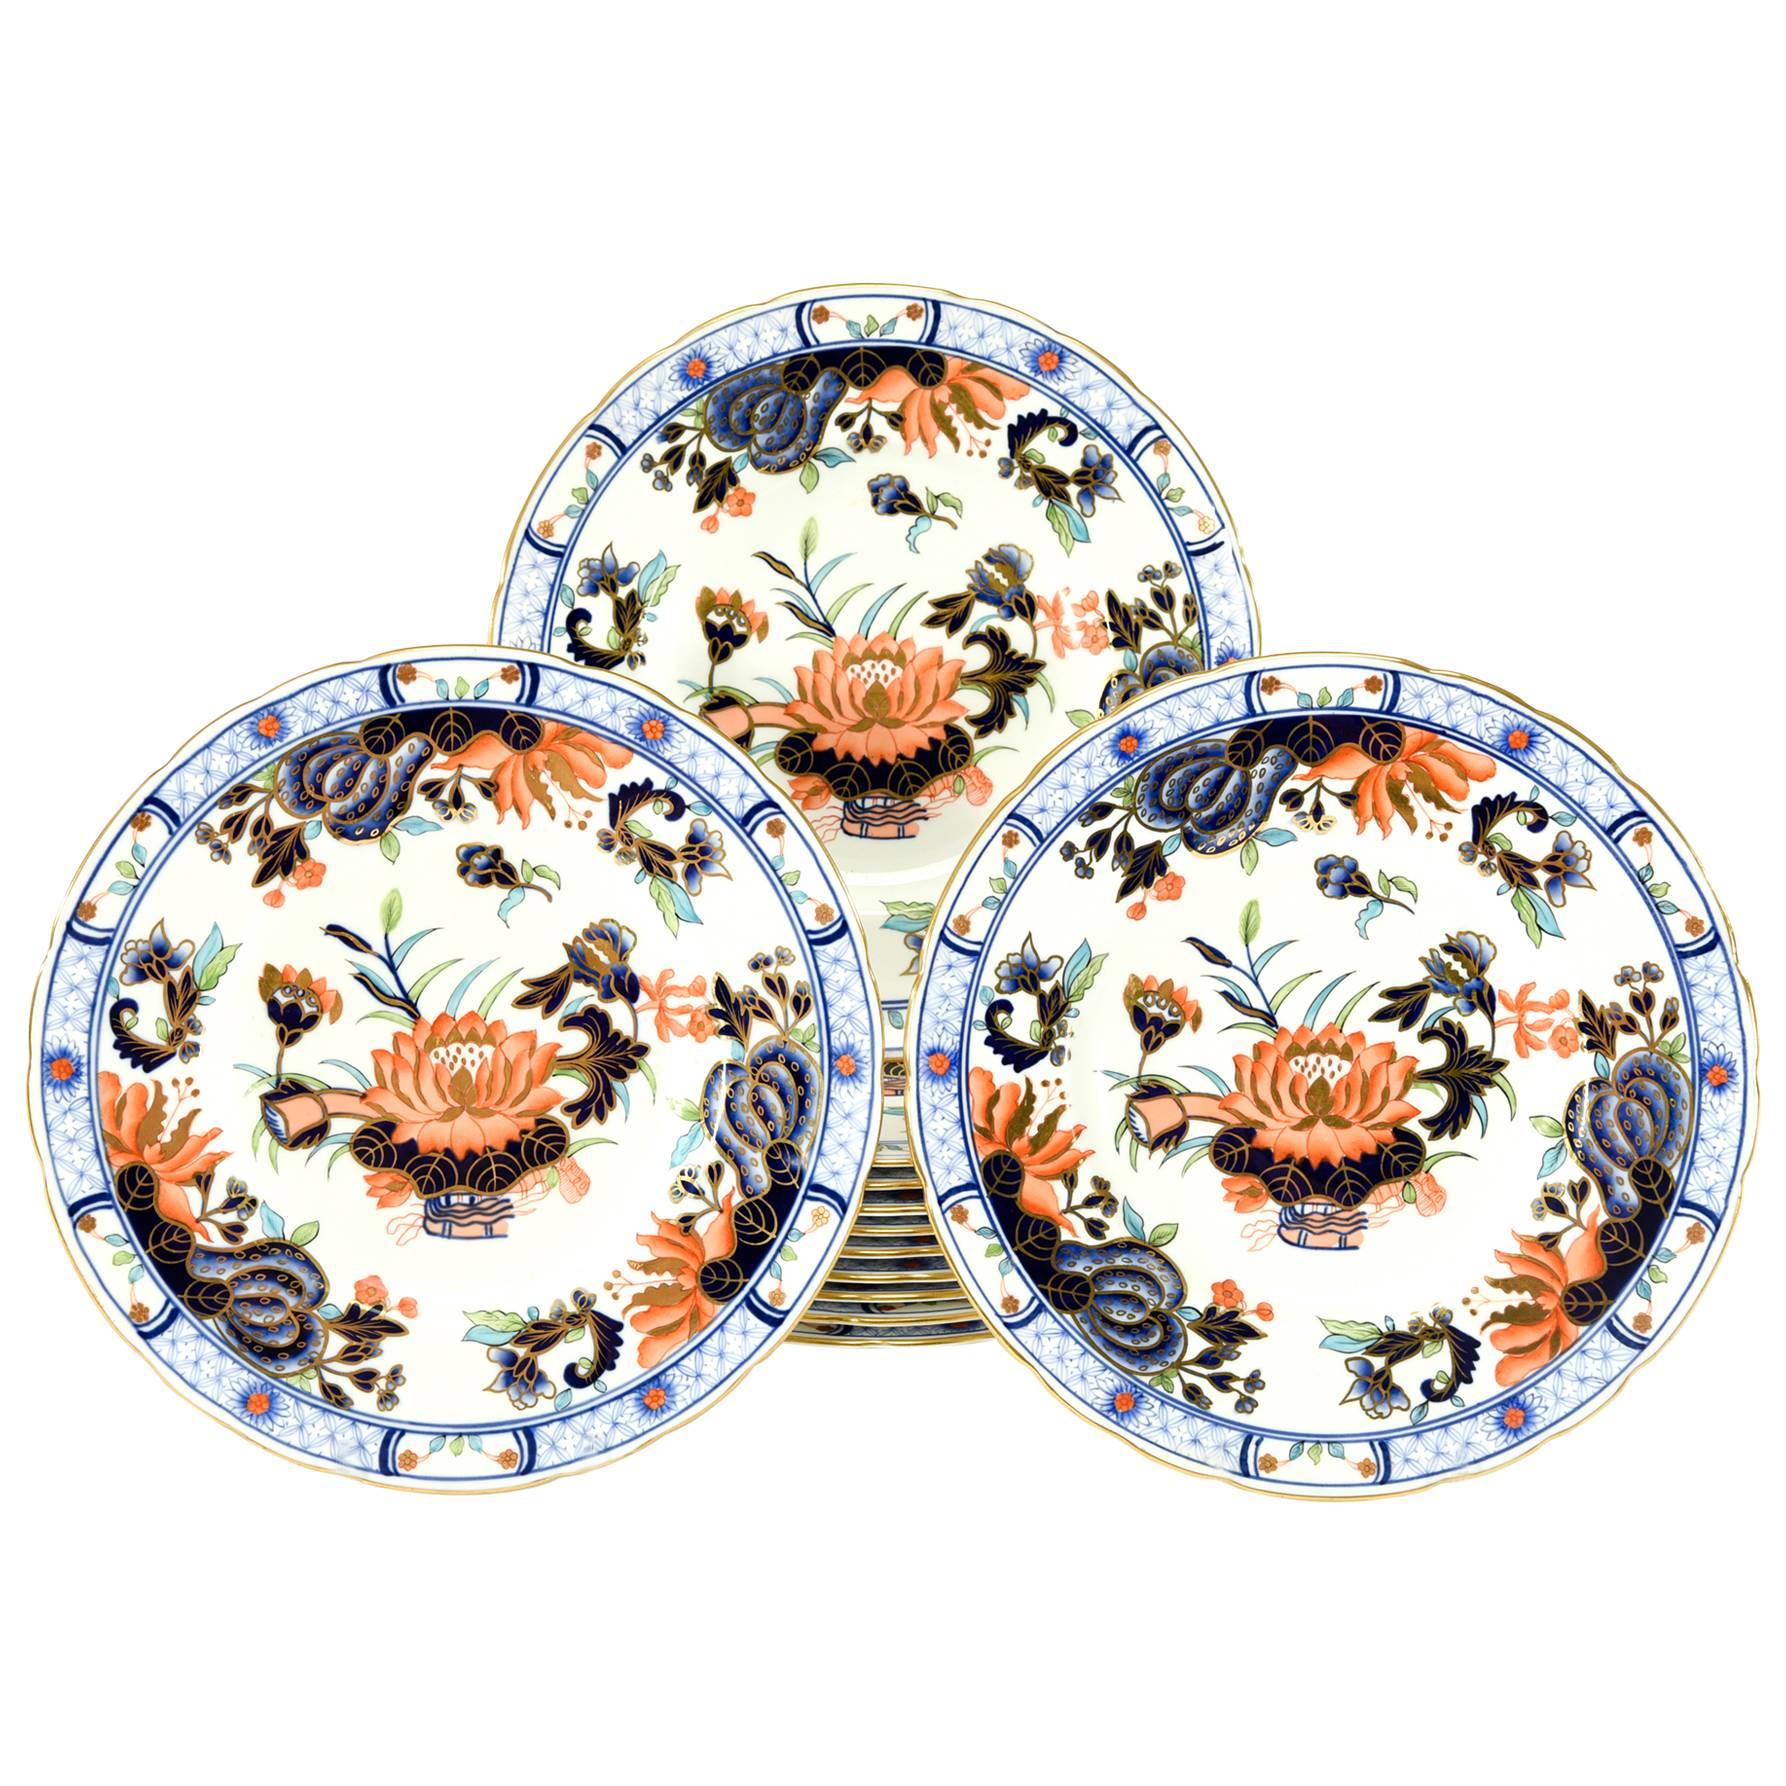 Set of 12 Royal Crown Derby Imari Decorated Dessert Plates for Tiffany